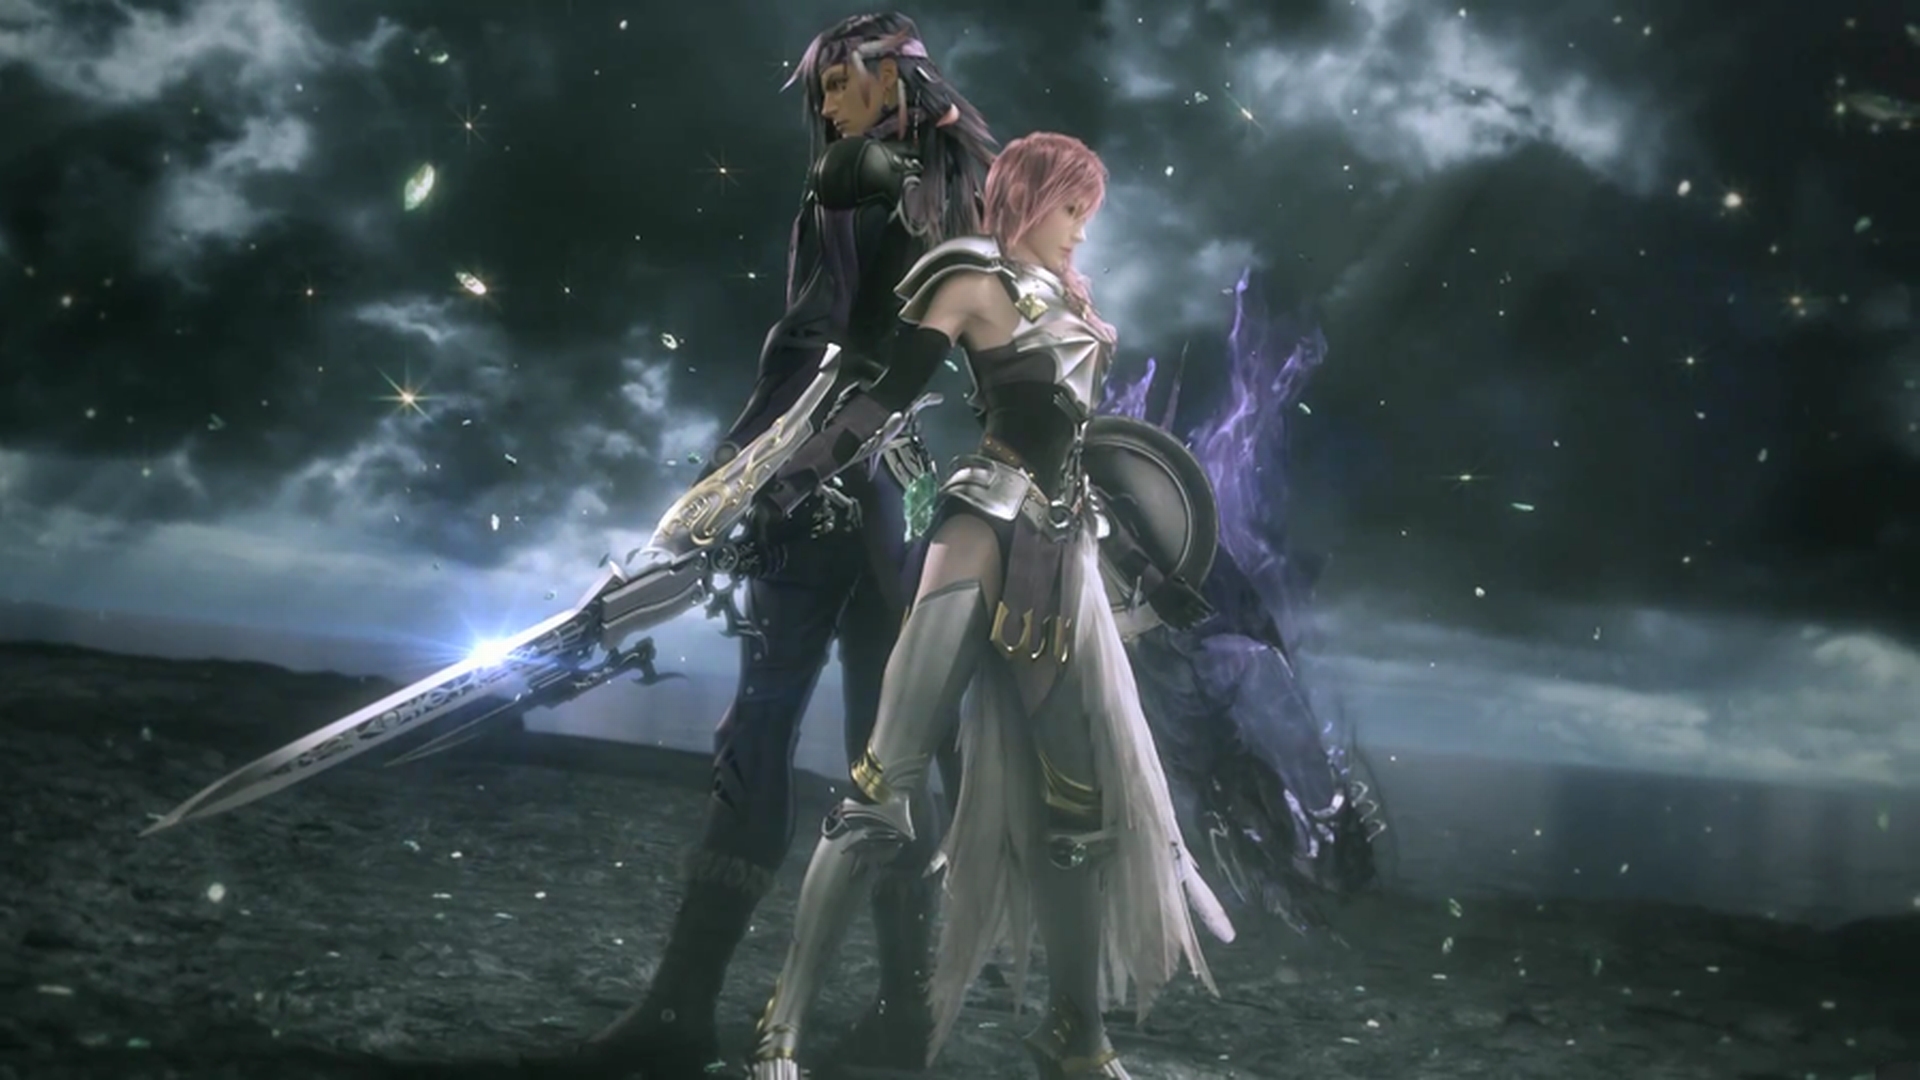 Battle between Caius Ballad and Lightning from Final Fantasy XIII-2 video game.